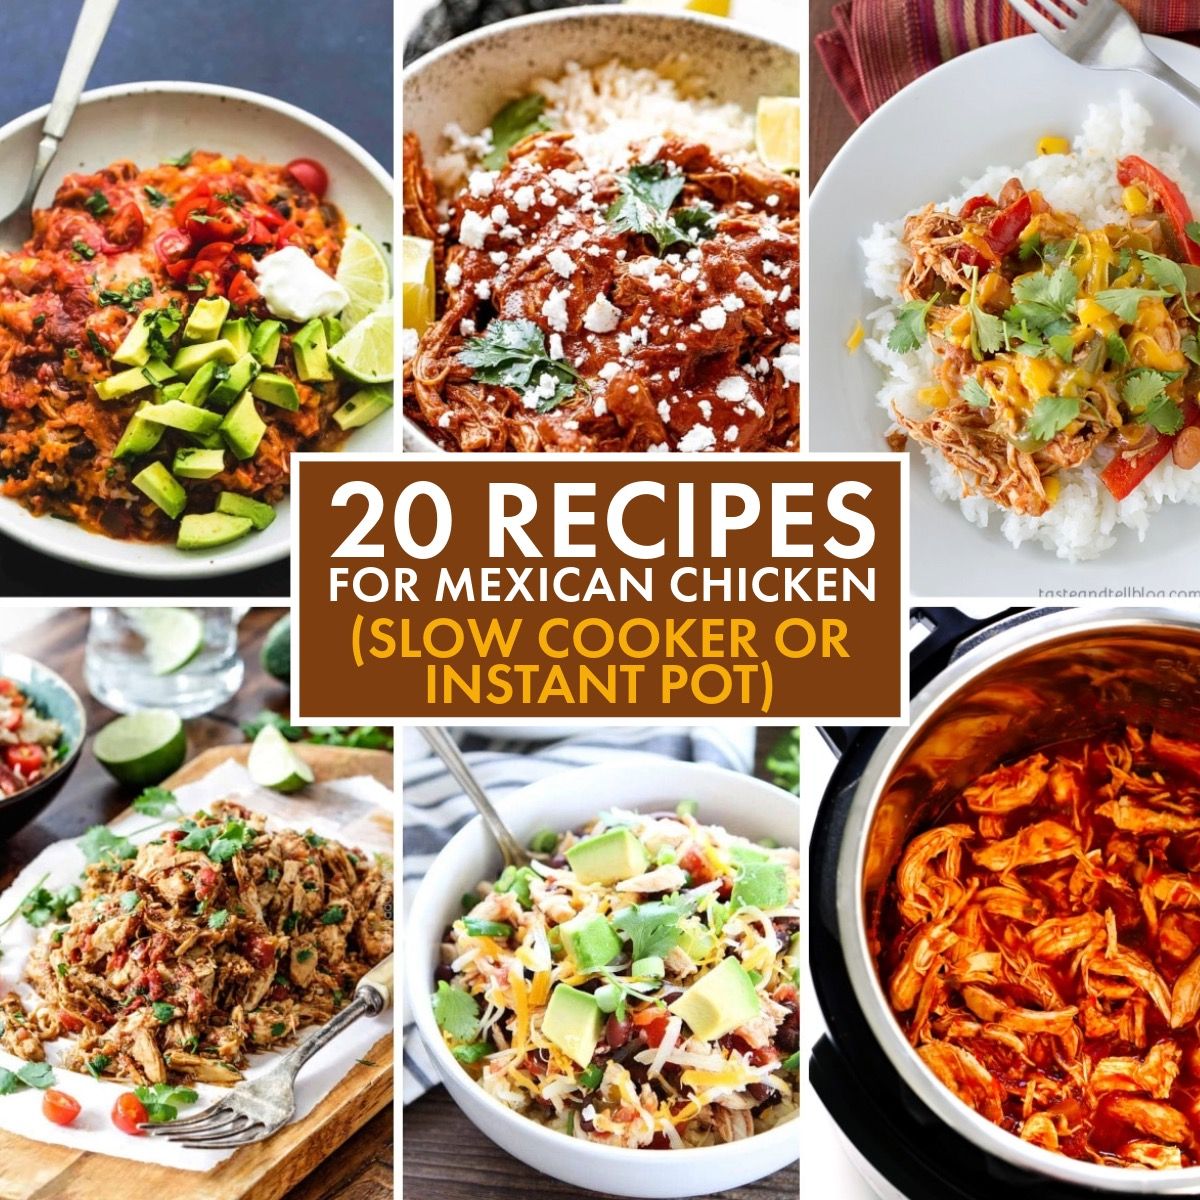 Text overlay collage showing featured recipes for 20 Recipes for Mexican Chicken (Slow Cooker or Instant Pot).